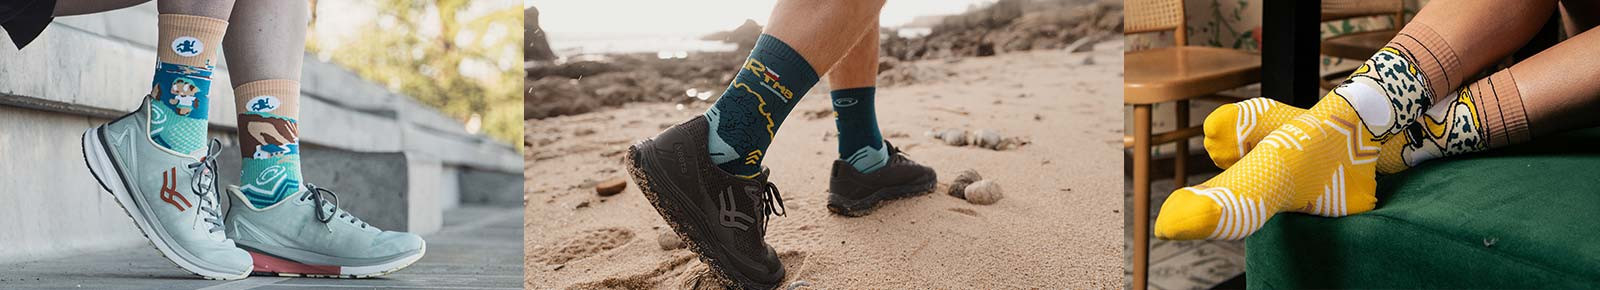 Socks for Running, Trail, Cycle, Multisports | BV SPORT